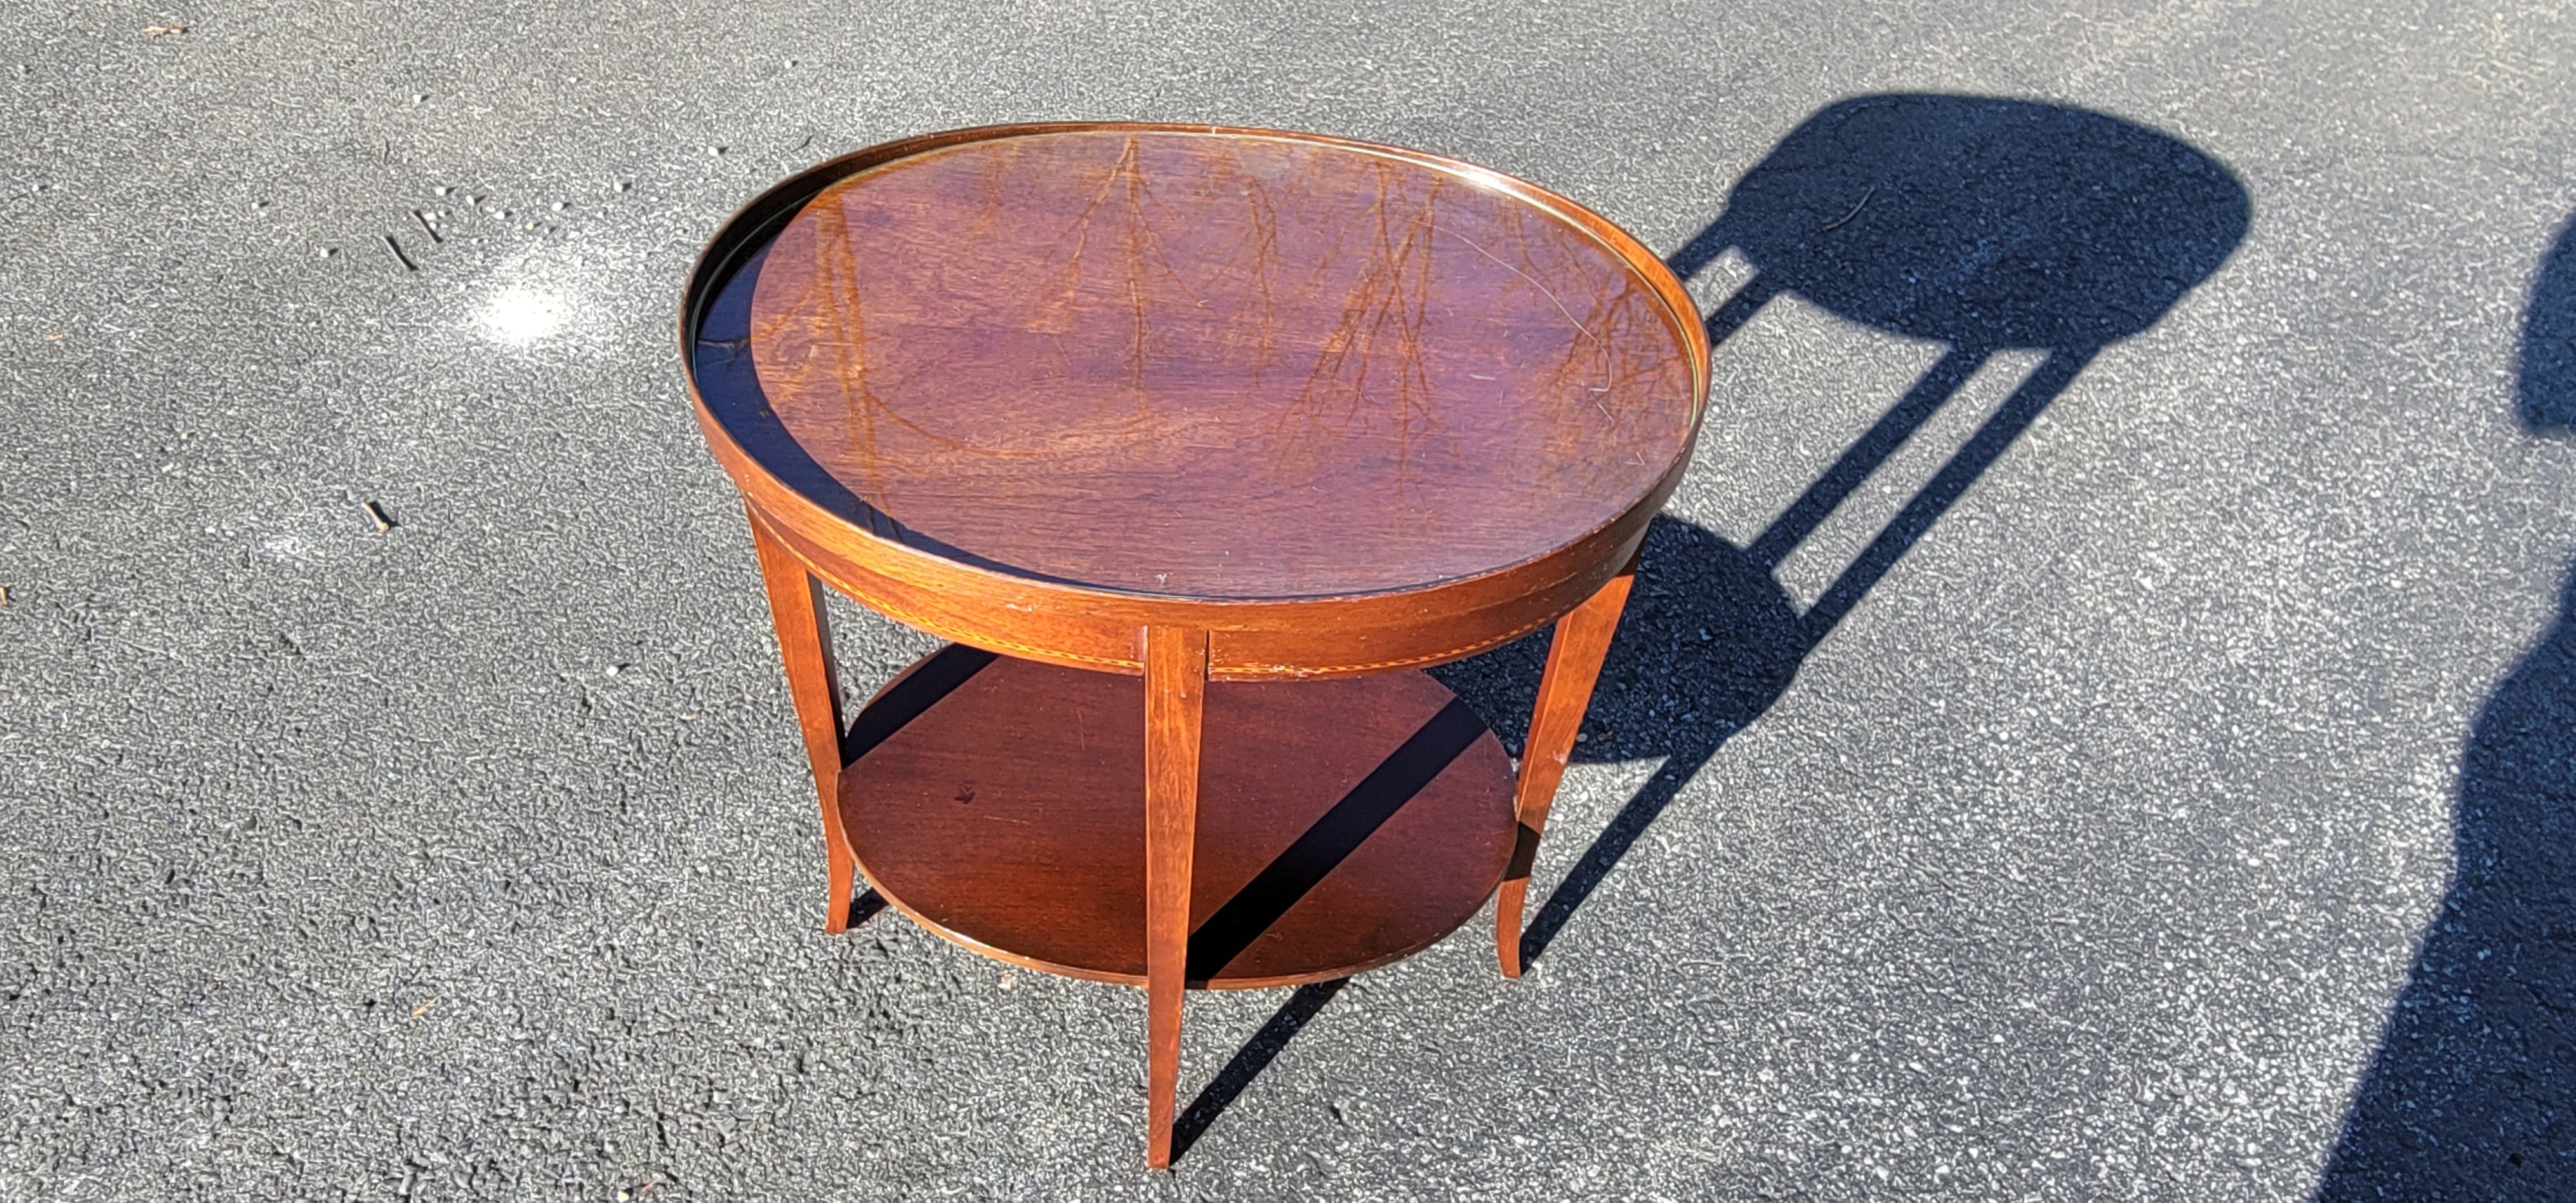 Mersman Tiered Mahogany Inlay Oval Side Table W/ Protective Glass Top In Good Condition For Sale In Germantown, MD